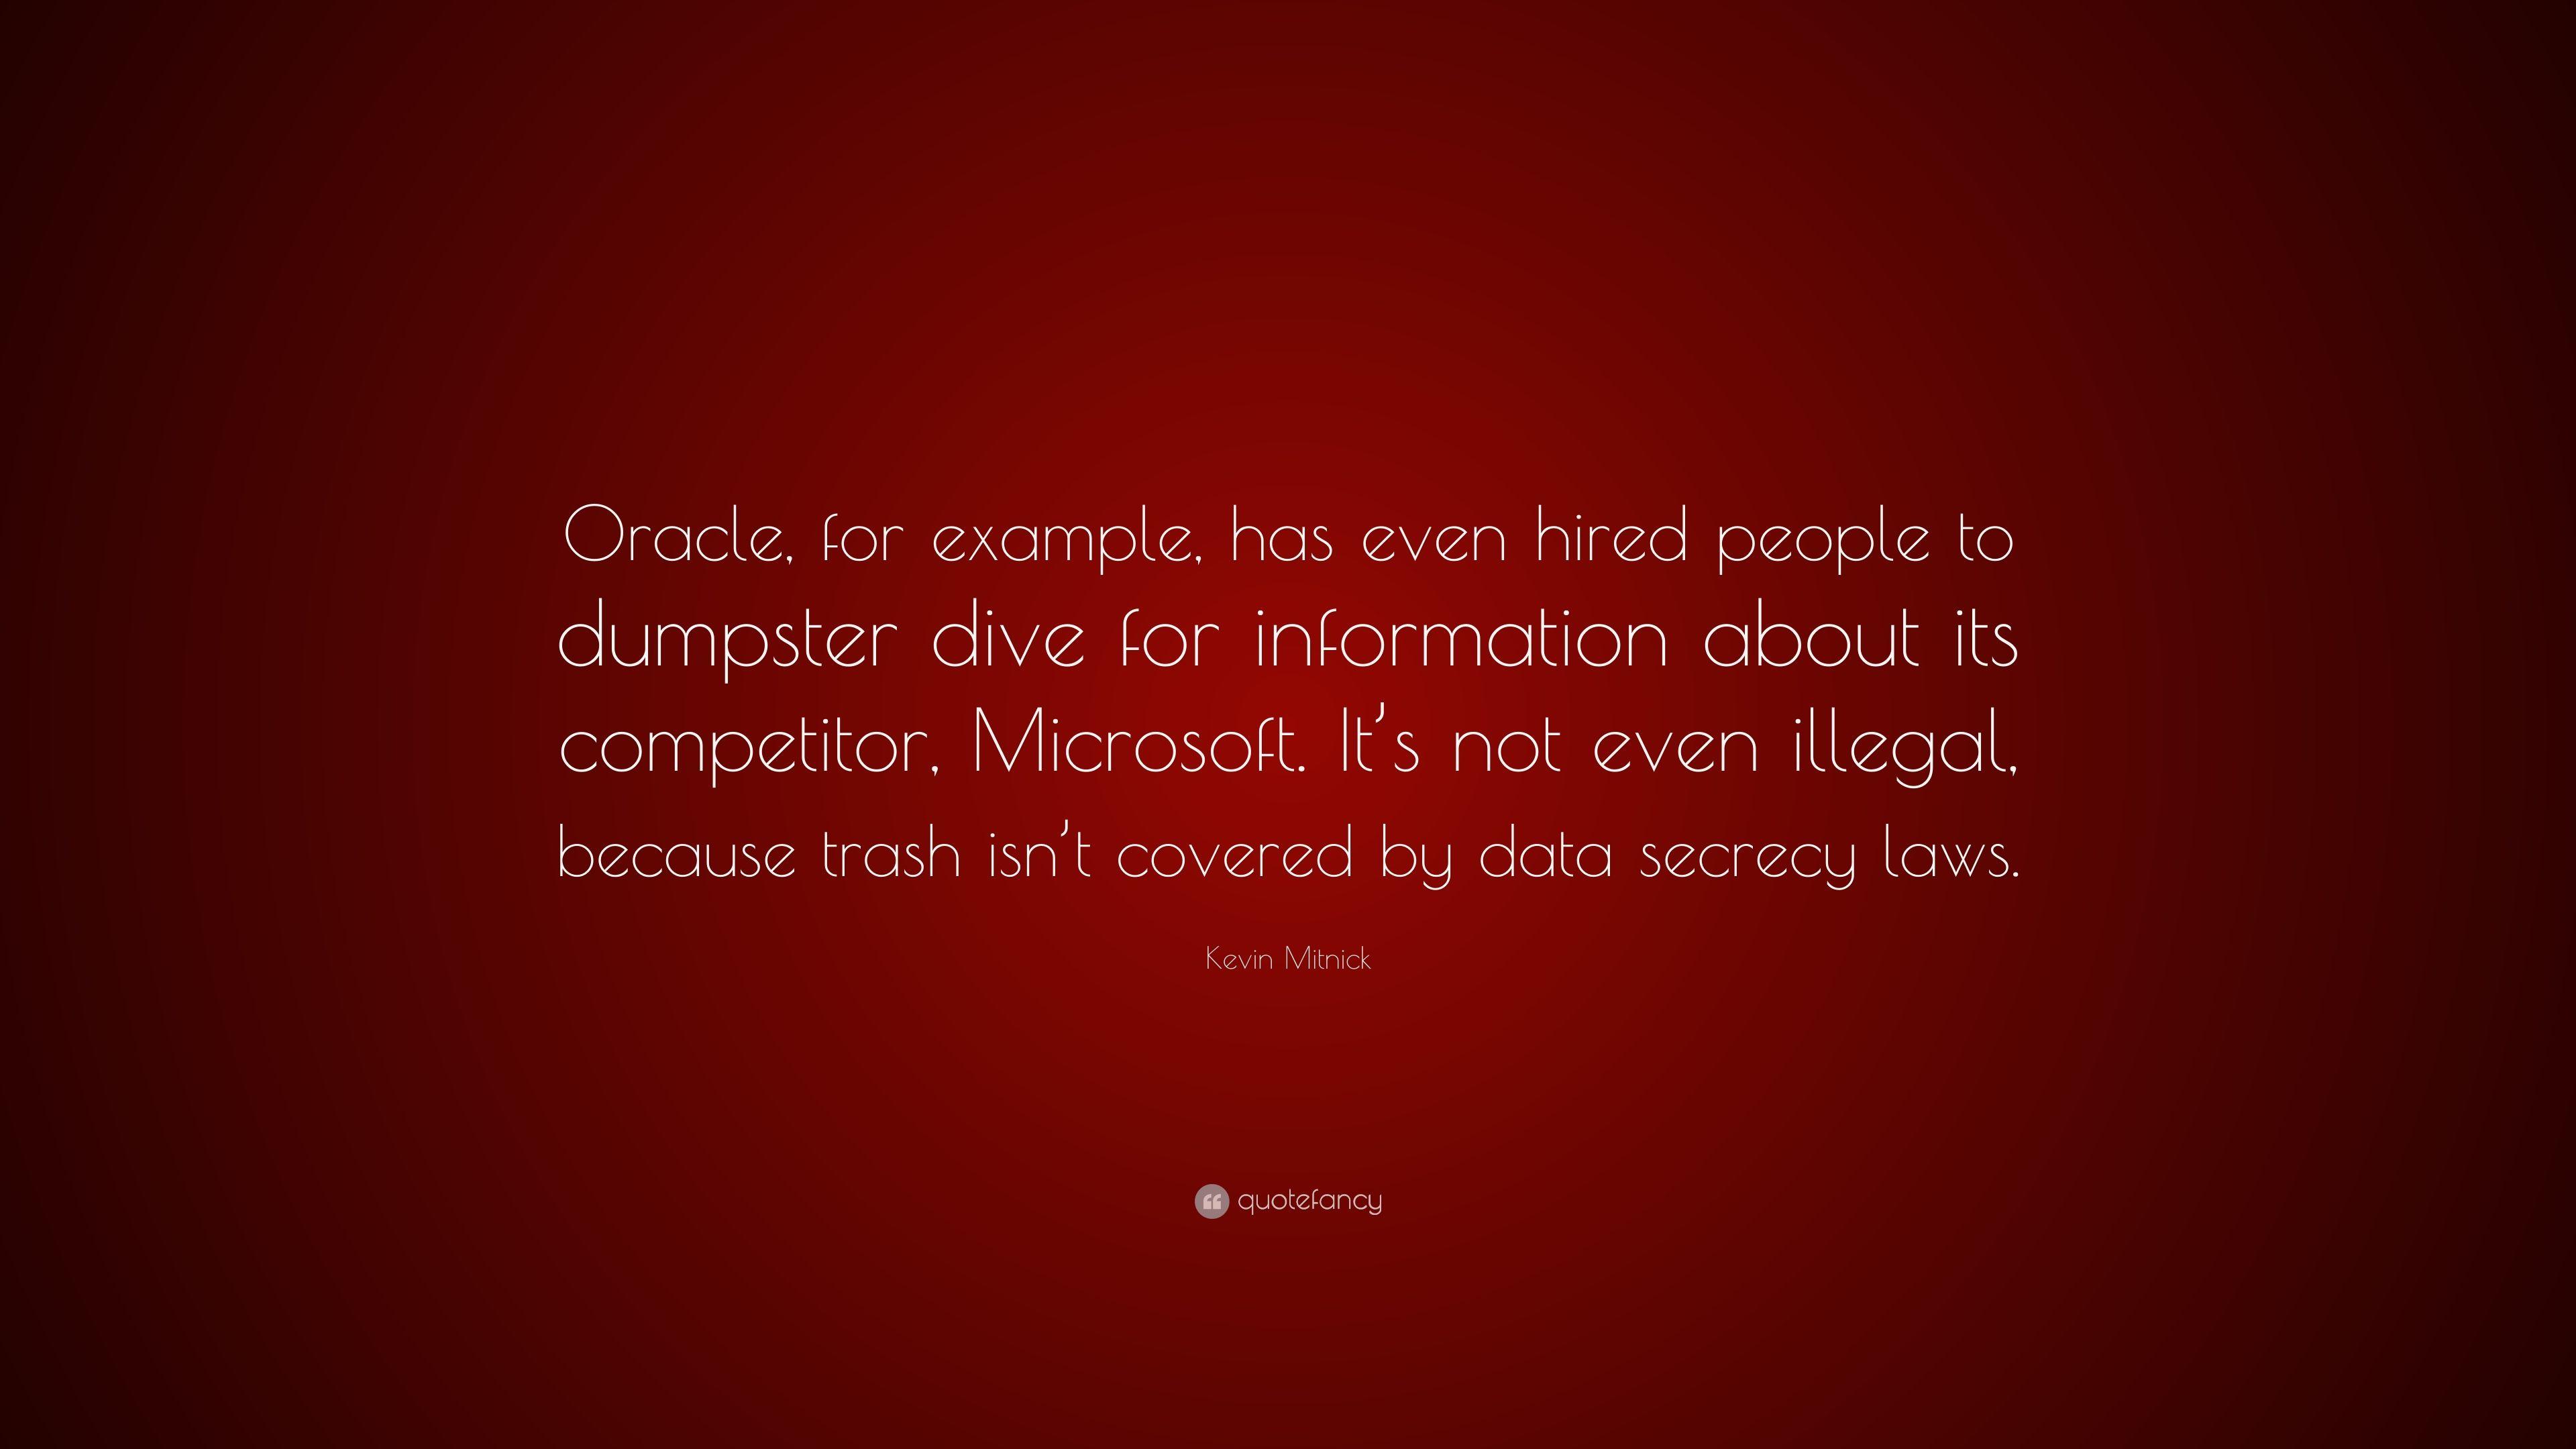 Kevin Mitnick Quote: “Oracle, for example, has even hired people